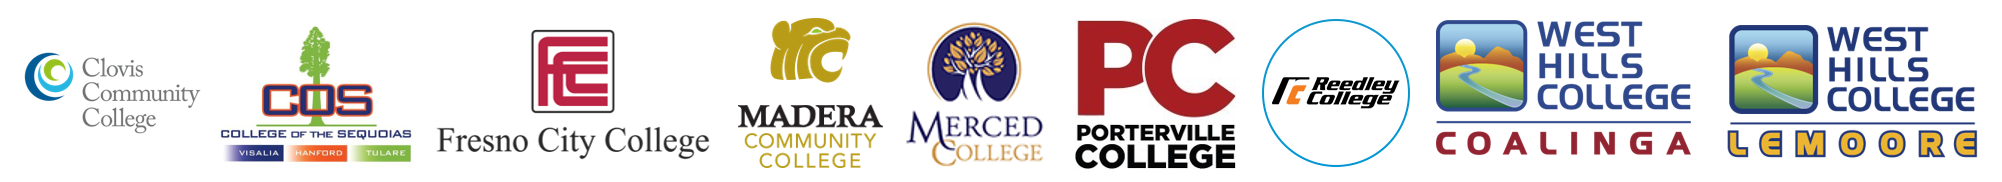 Logos of Participating Colleges